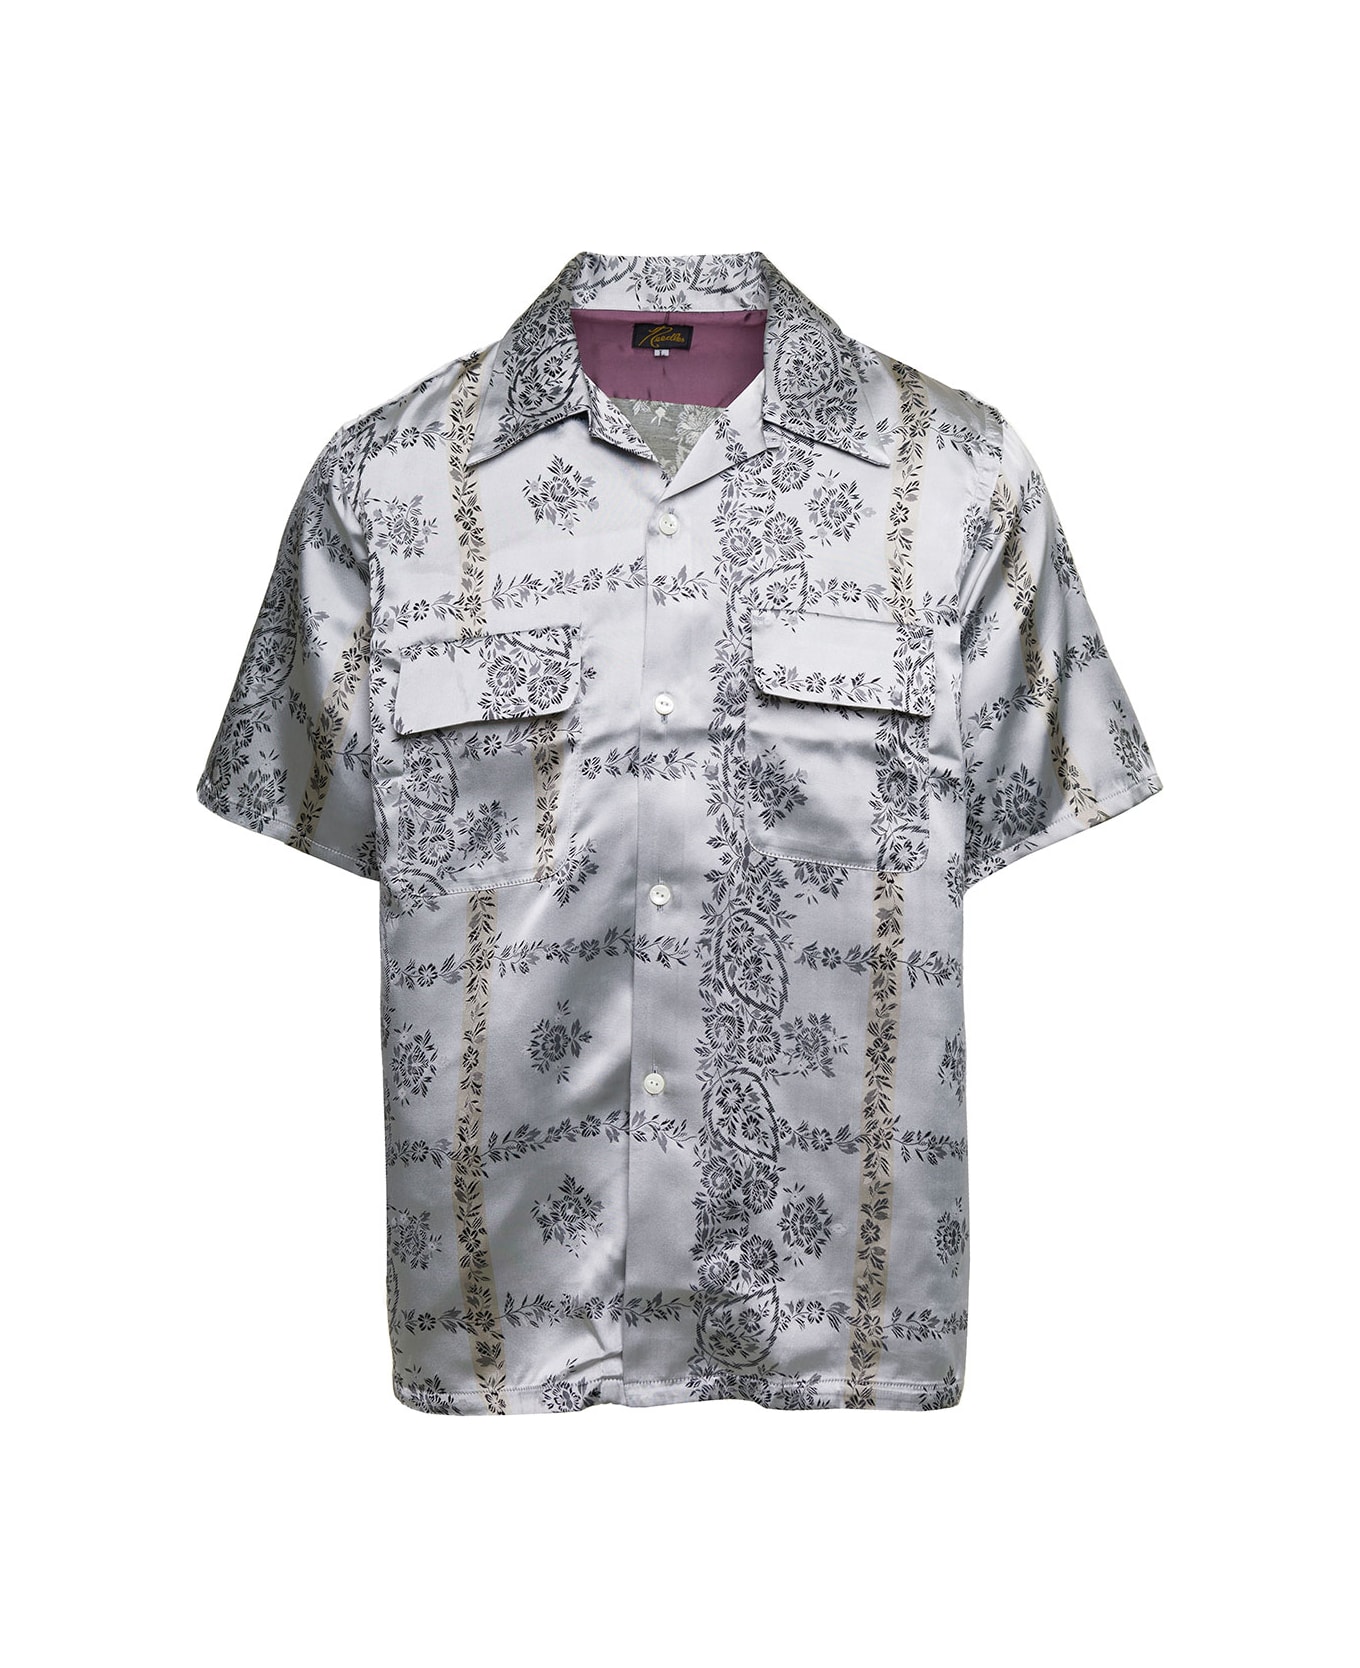 Needles Silver Bowling Shirt With All-over Floreal Print In Cupro Man - Grey